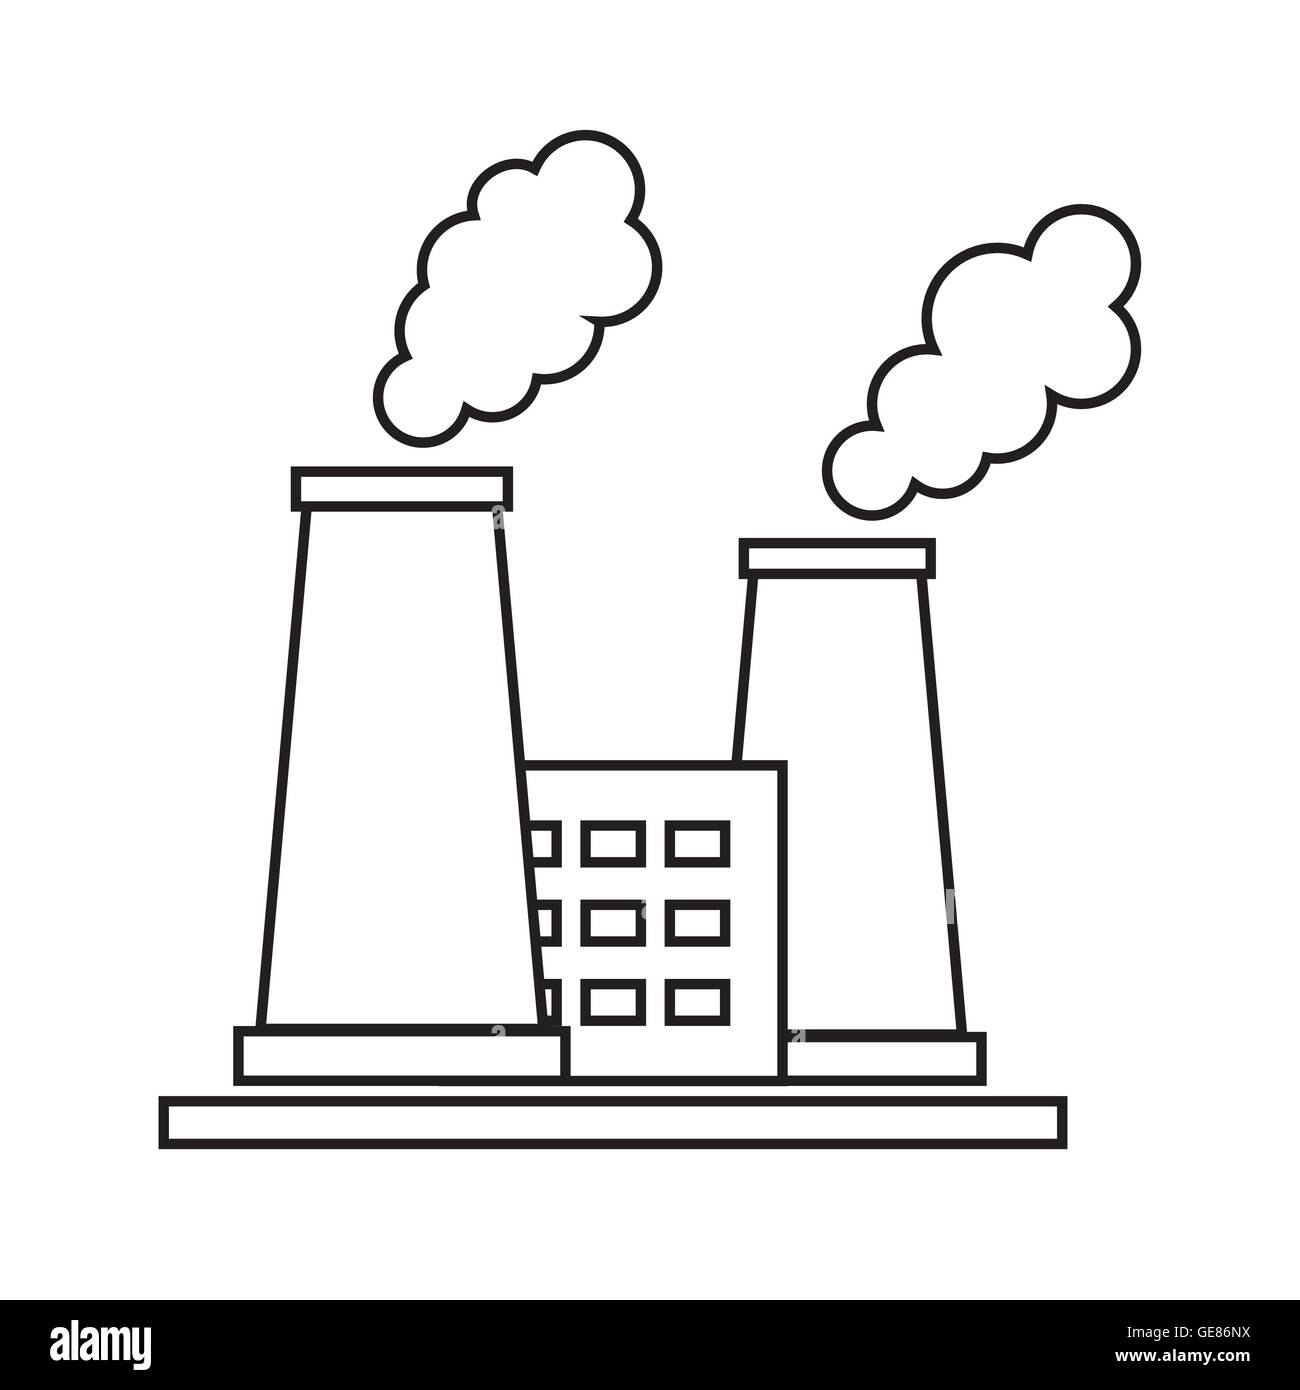 Fossil fuel chimneys Black and White Stock Photos & Images - Alamy